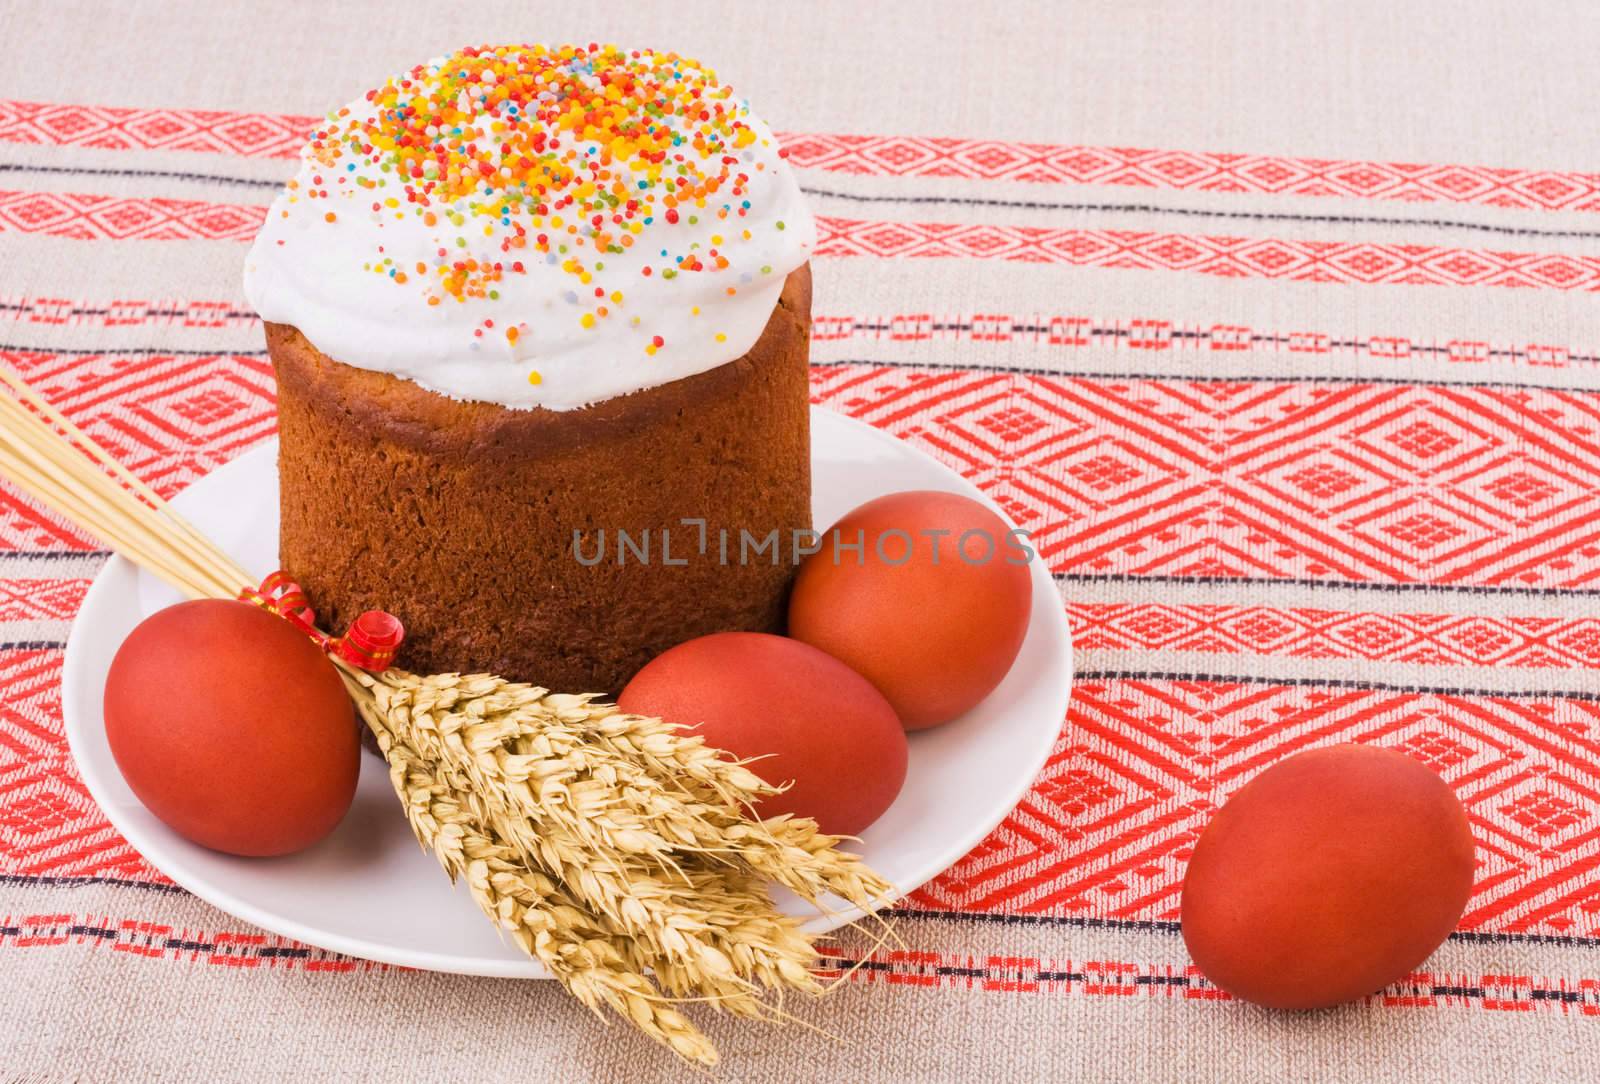 Easter Cake, Painted Eggs and Ears of Wheat on traditional tablecloth